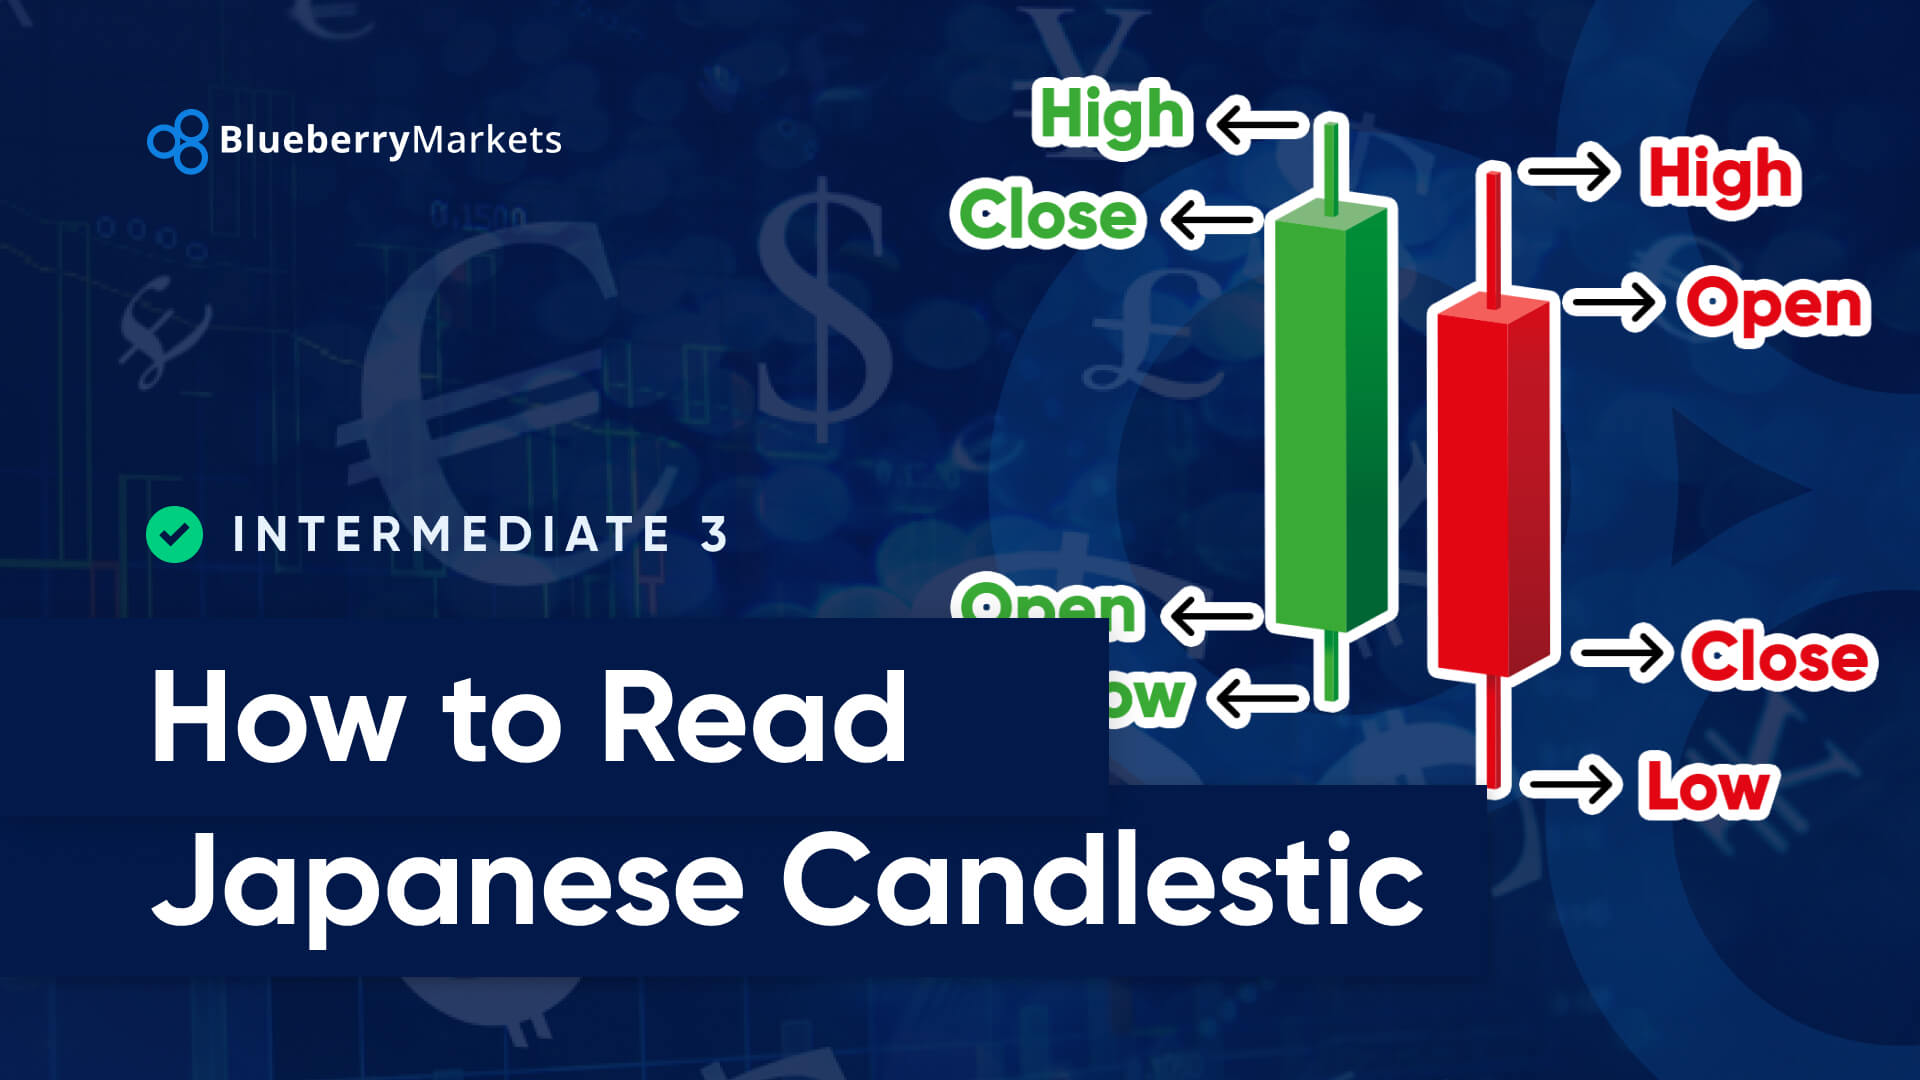 How to Read Japanese Candlesticks